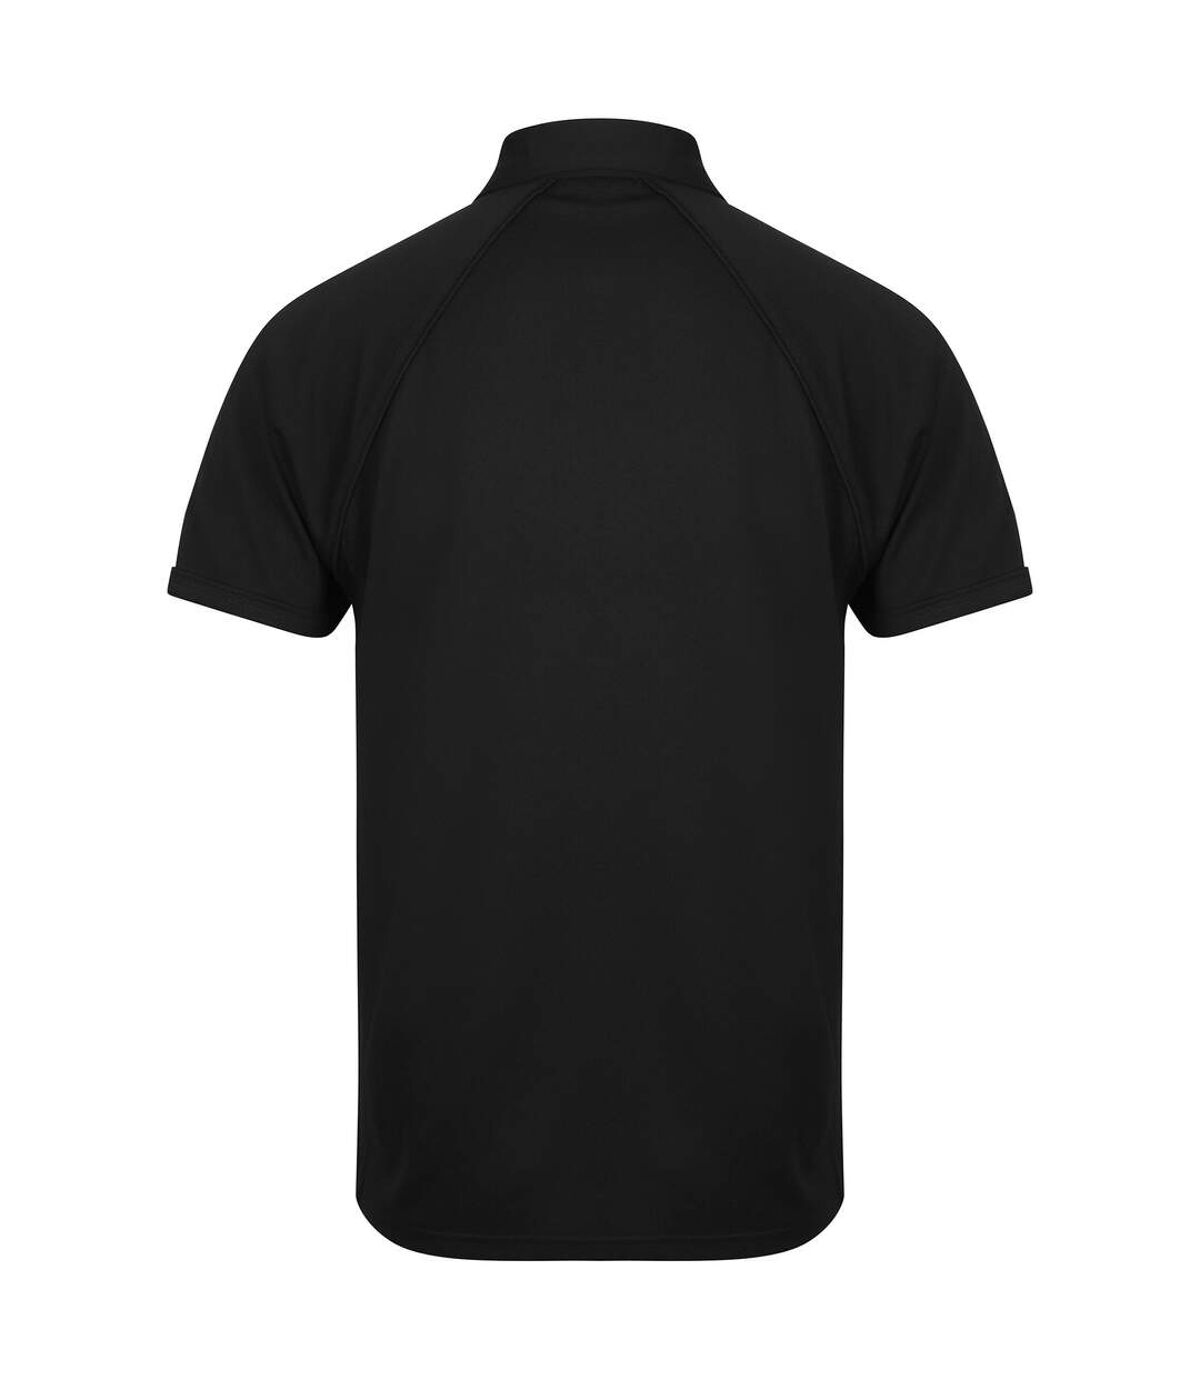 Finden & Hales Mens Piped Performance Sports Polo Shirt (Black/Black)